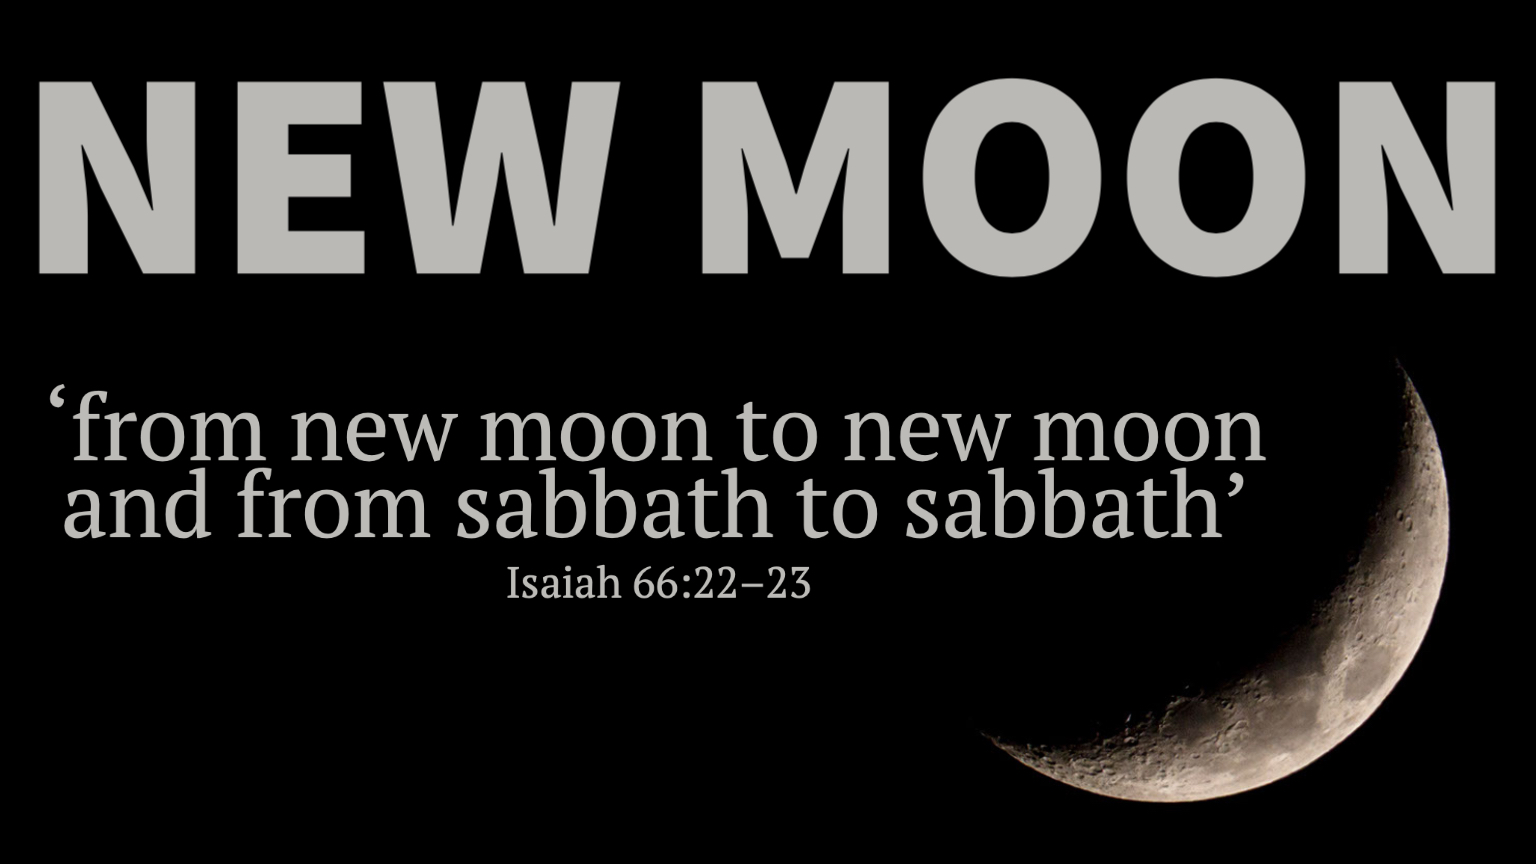 Rosh Chodesh (New Moon): 12th month online services